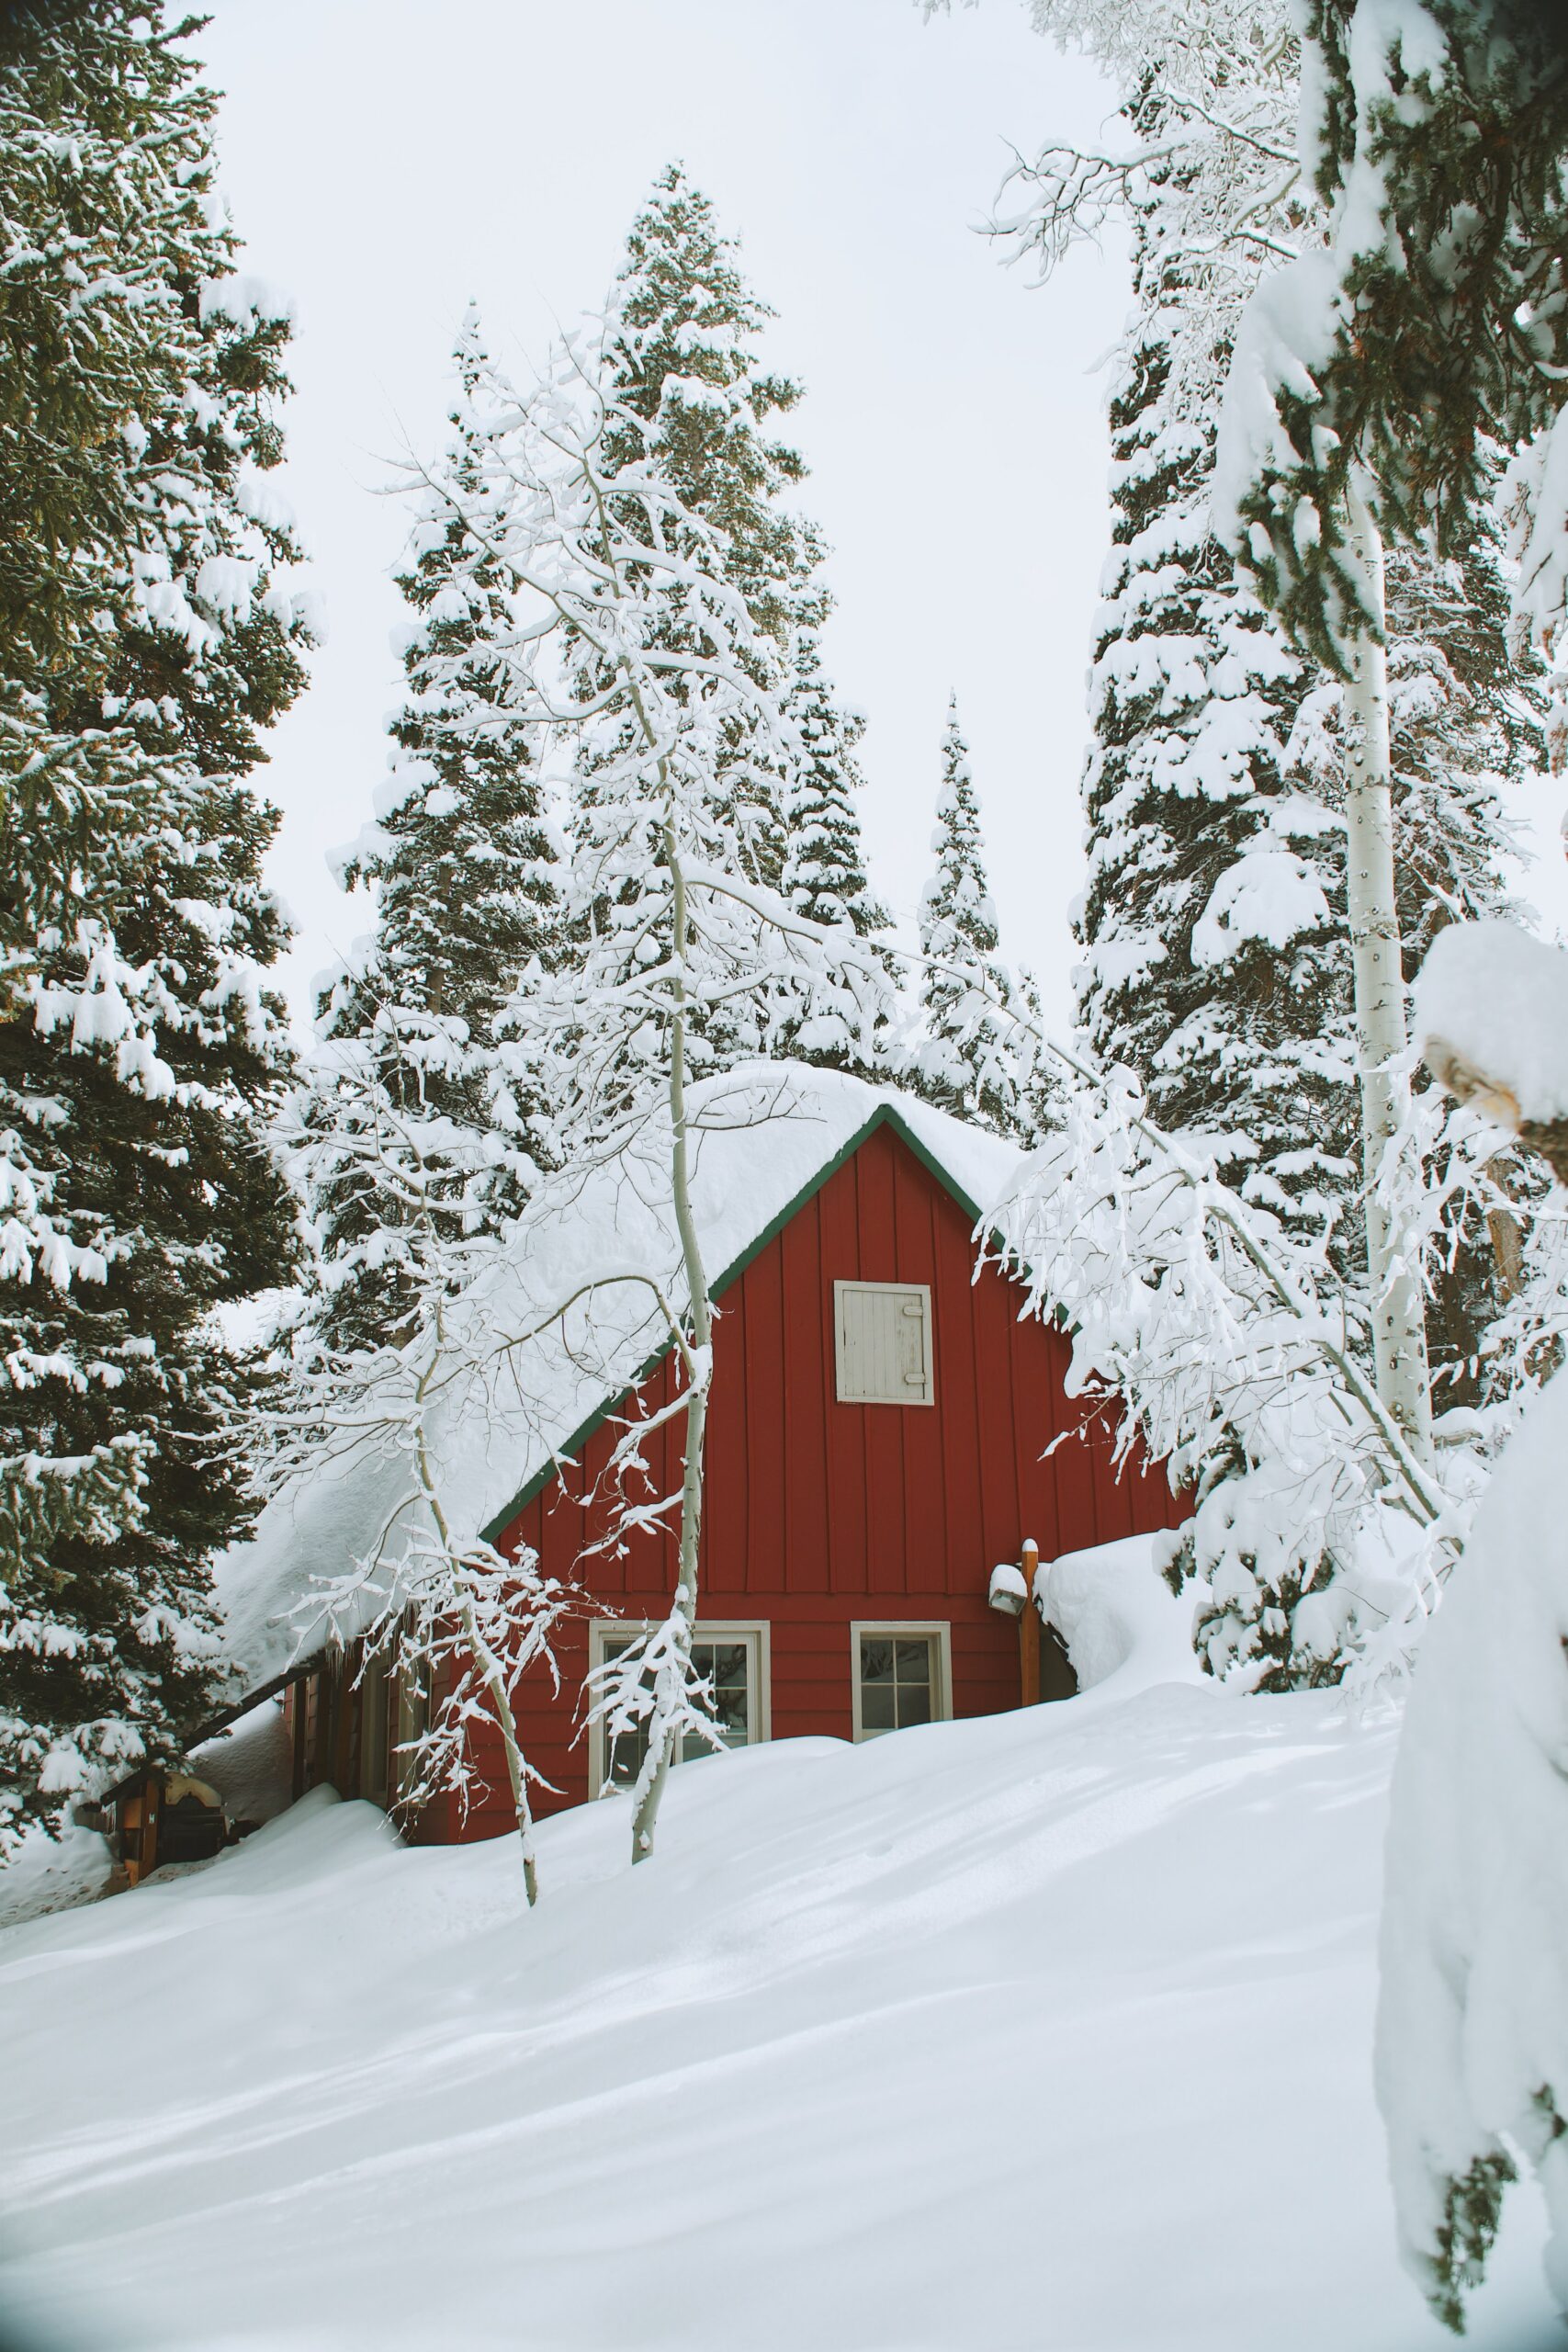 A red cabin sits amidst a snowy foreground and snowy trees growing around it.